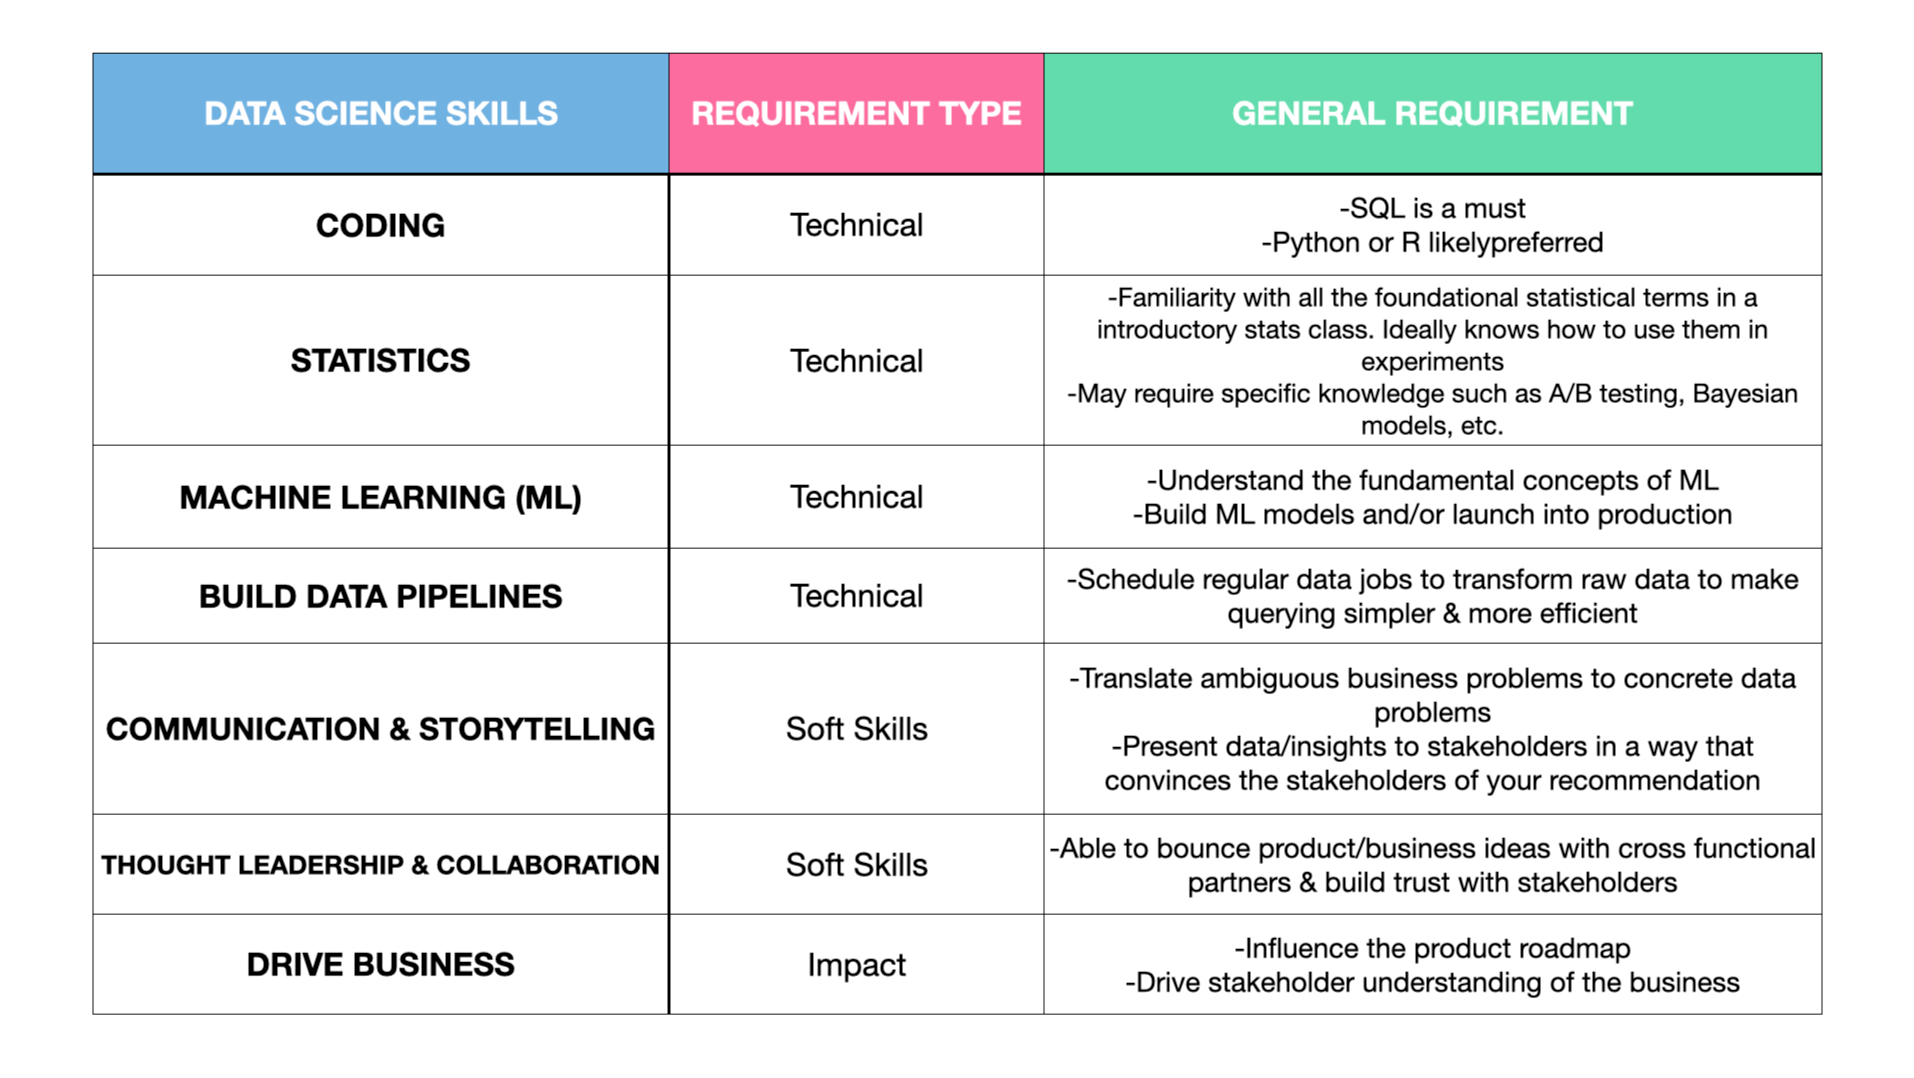 Table of data science skills and requirements